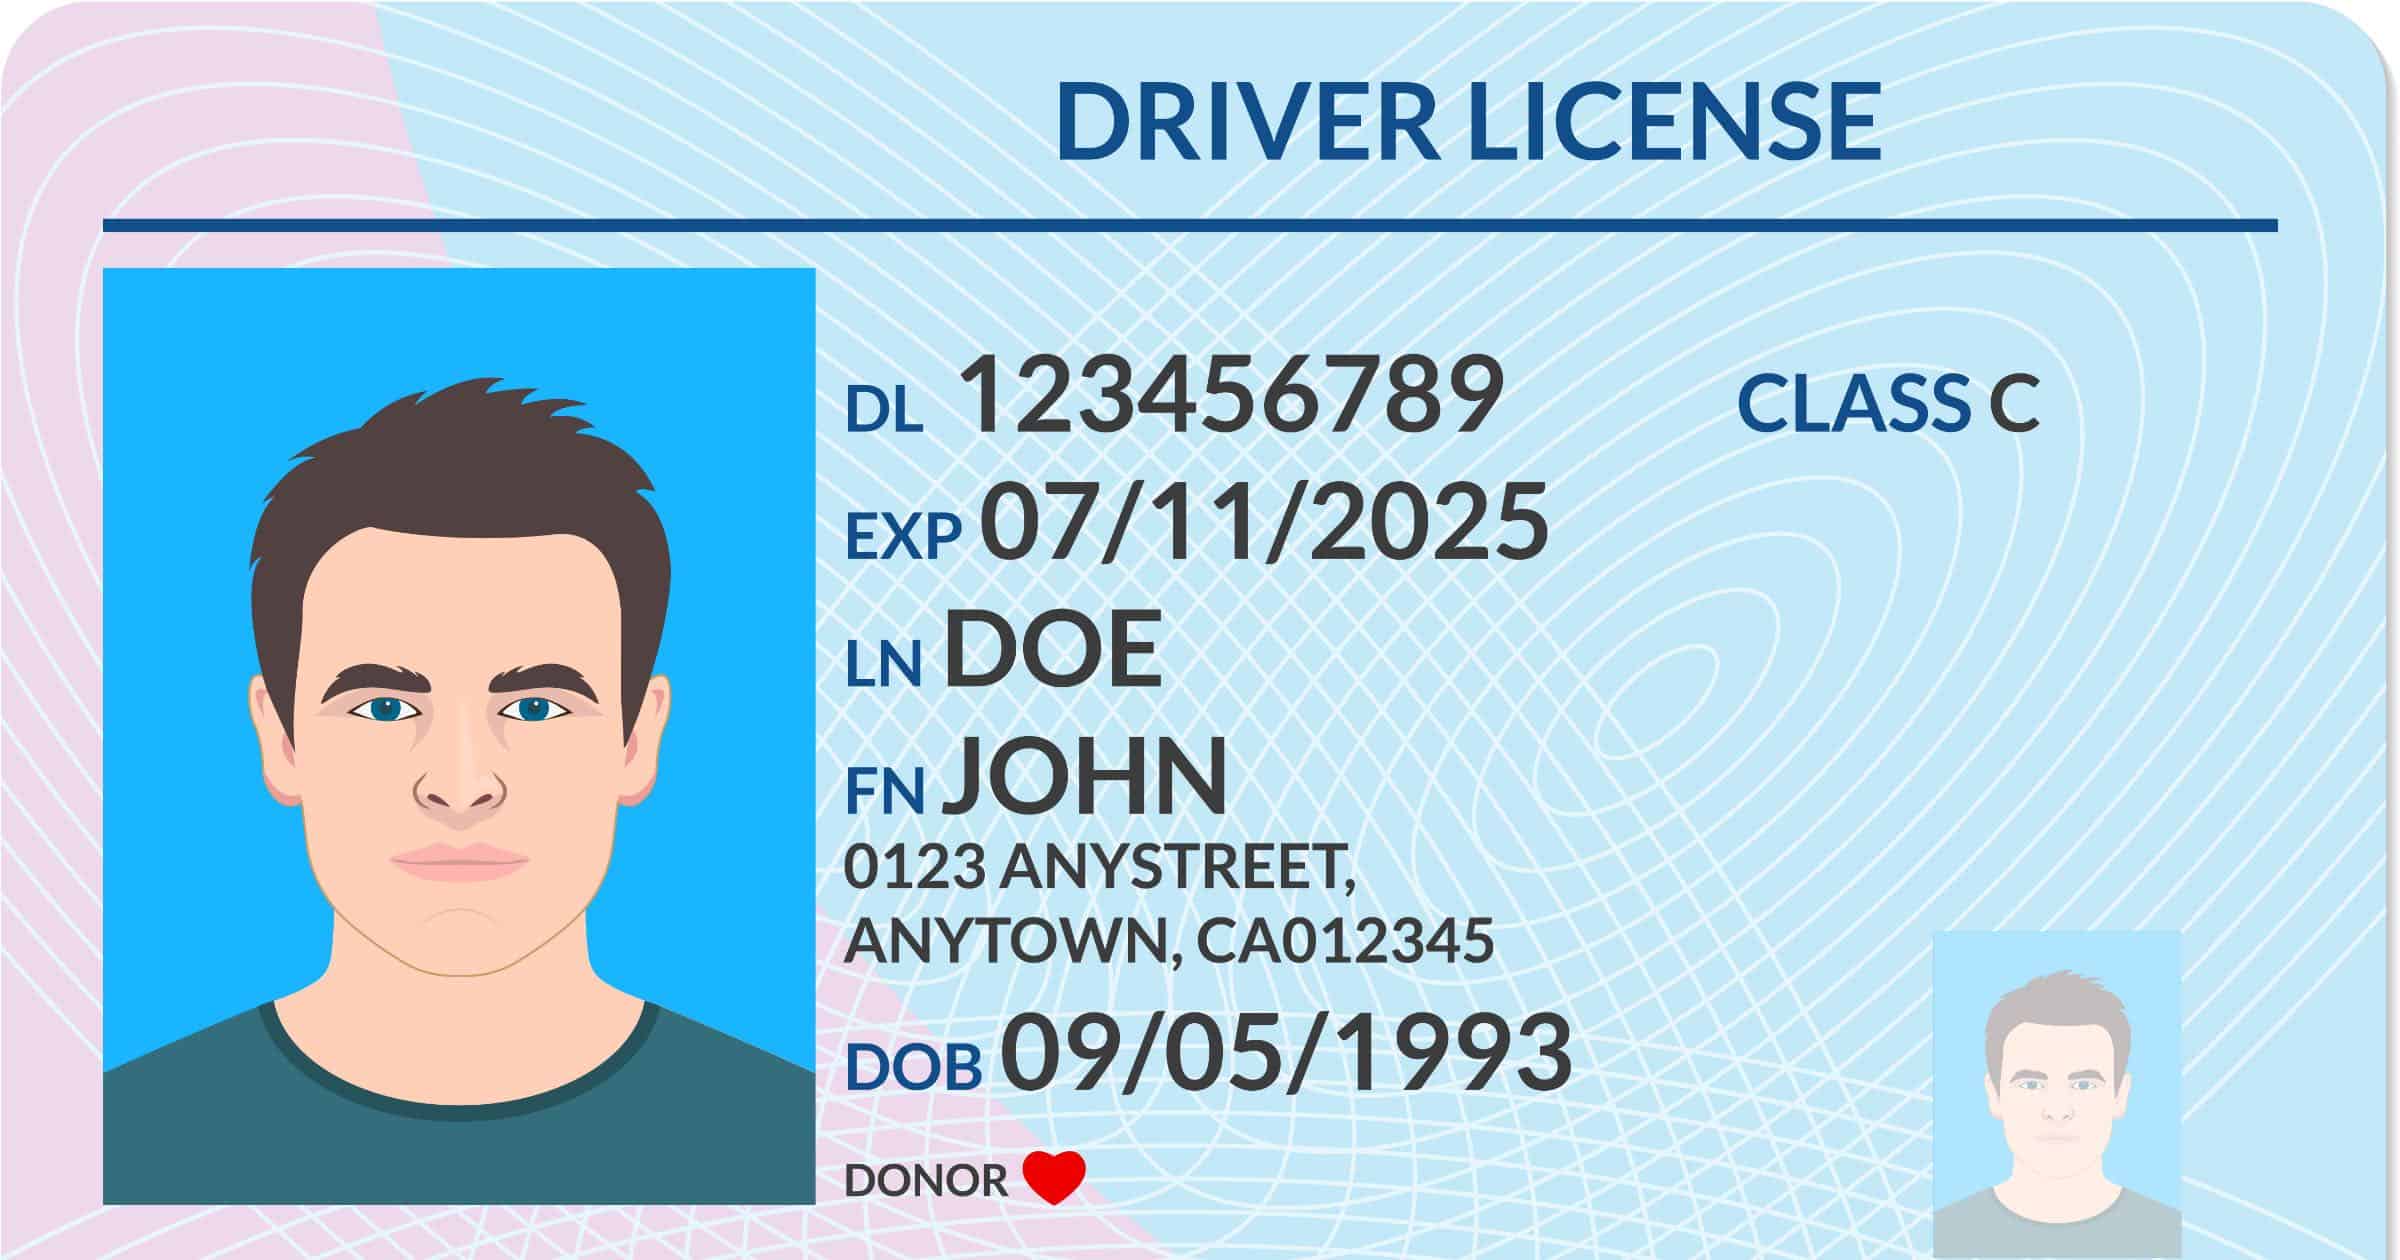 Washington DC Council Approves Plan to Issue Digital IDs